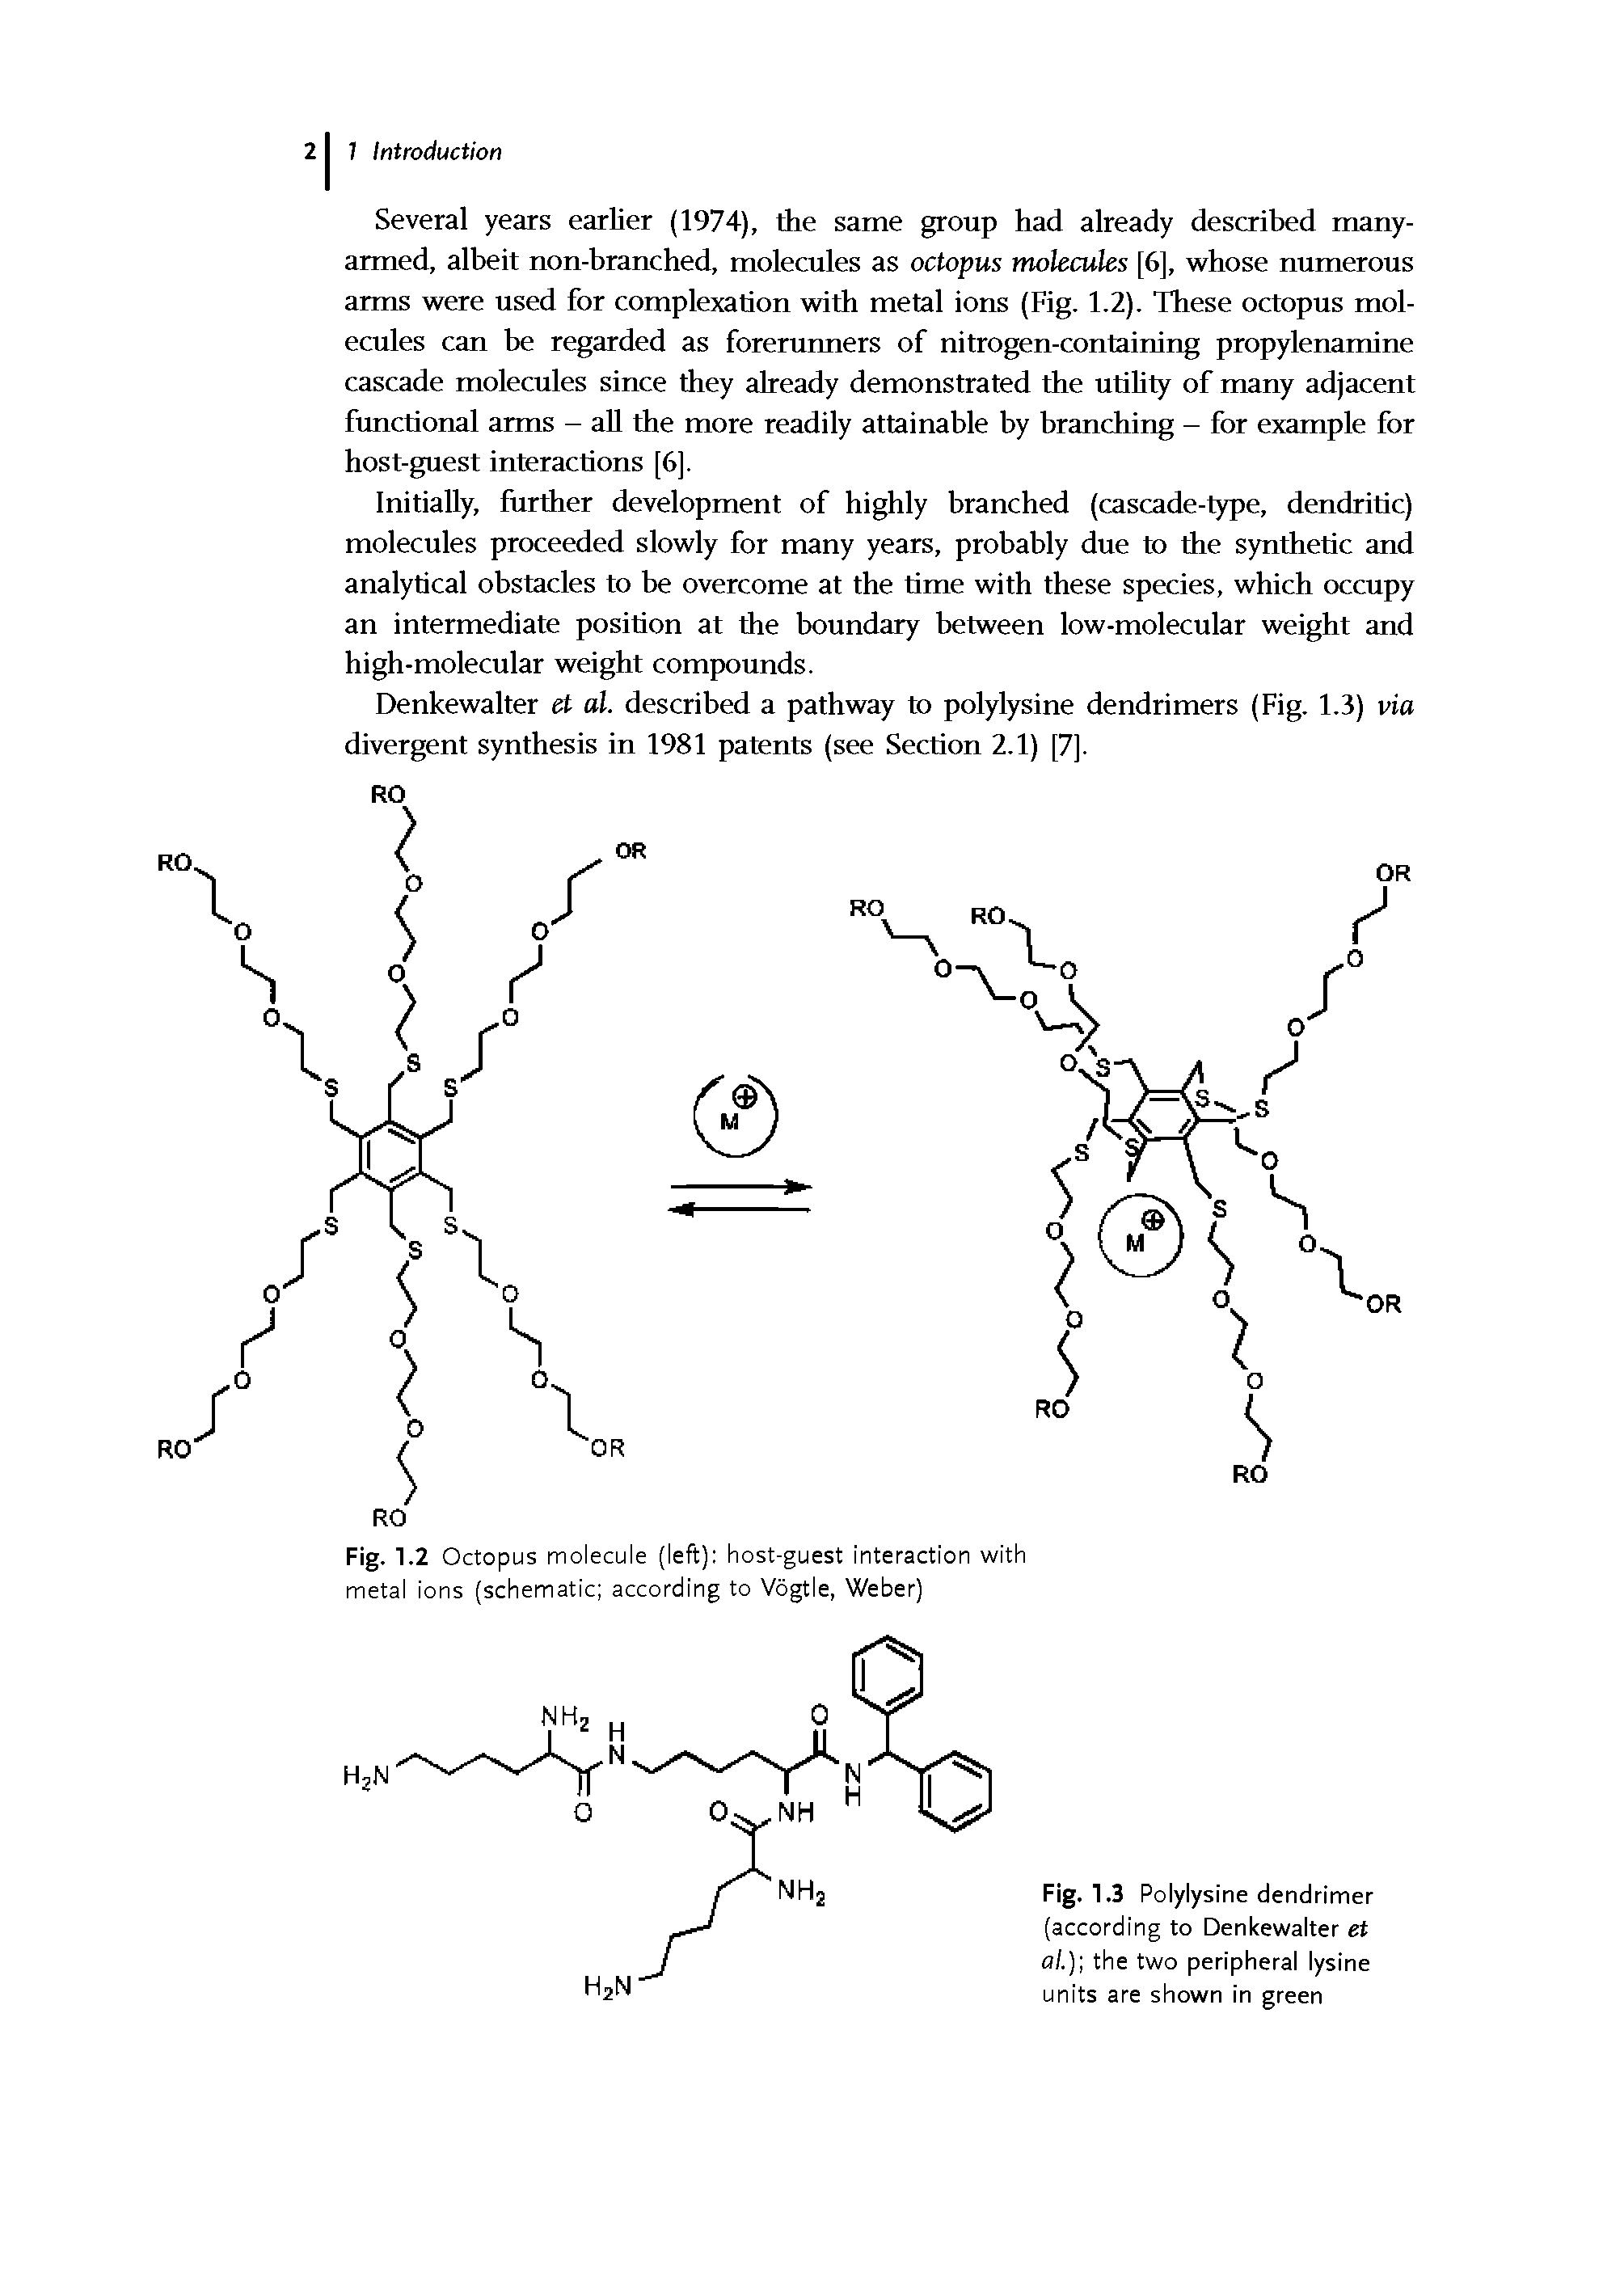 Fig. 1.2 Octopus molecule (left) host-guest interaction with metal ions (schematic according to Vogtle, Weber)...